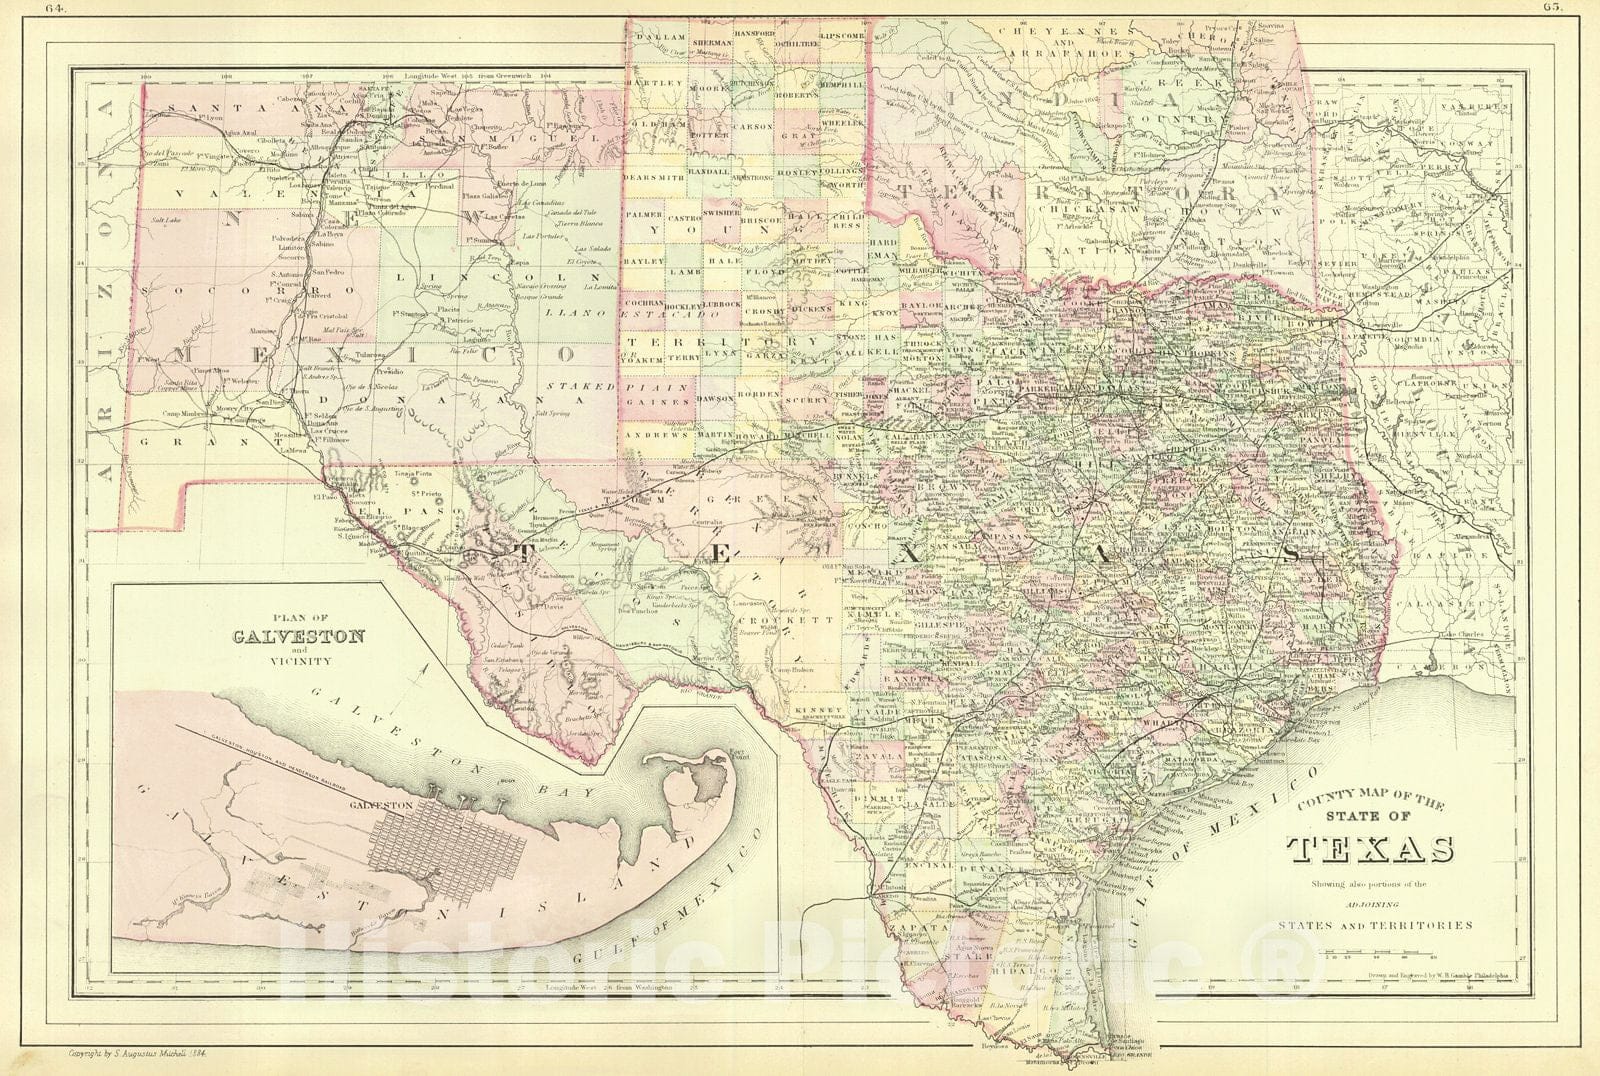 Historic Map : 1886 County Map of the State of Texas : Vintage Wall Art